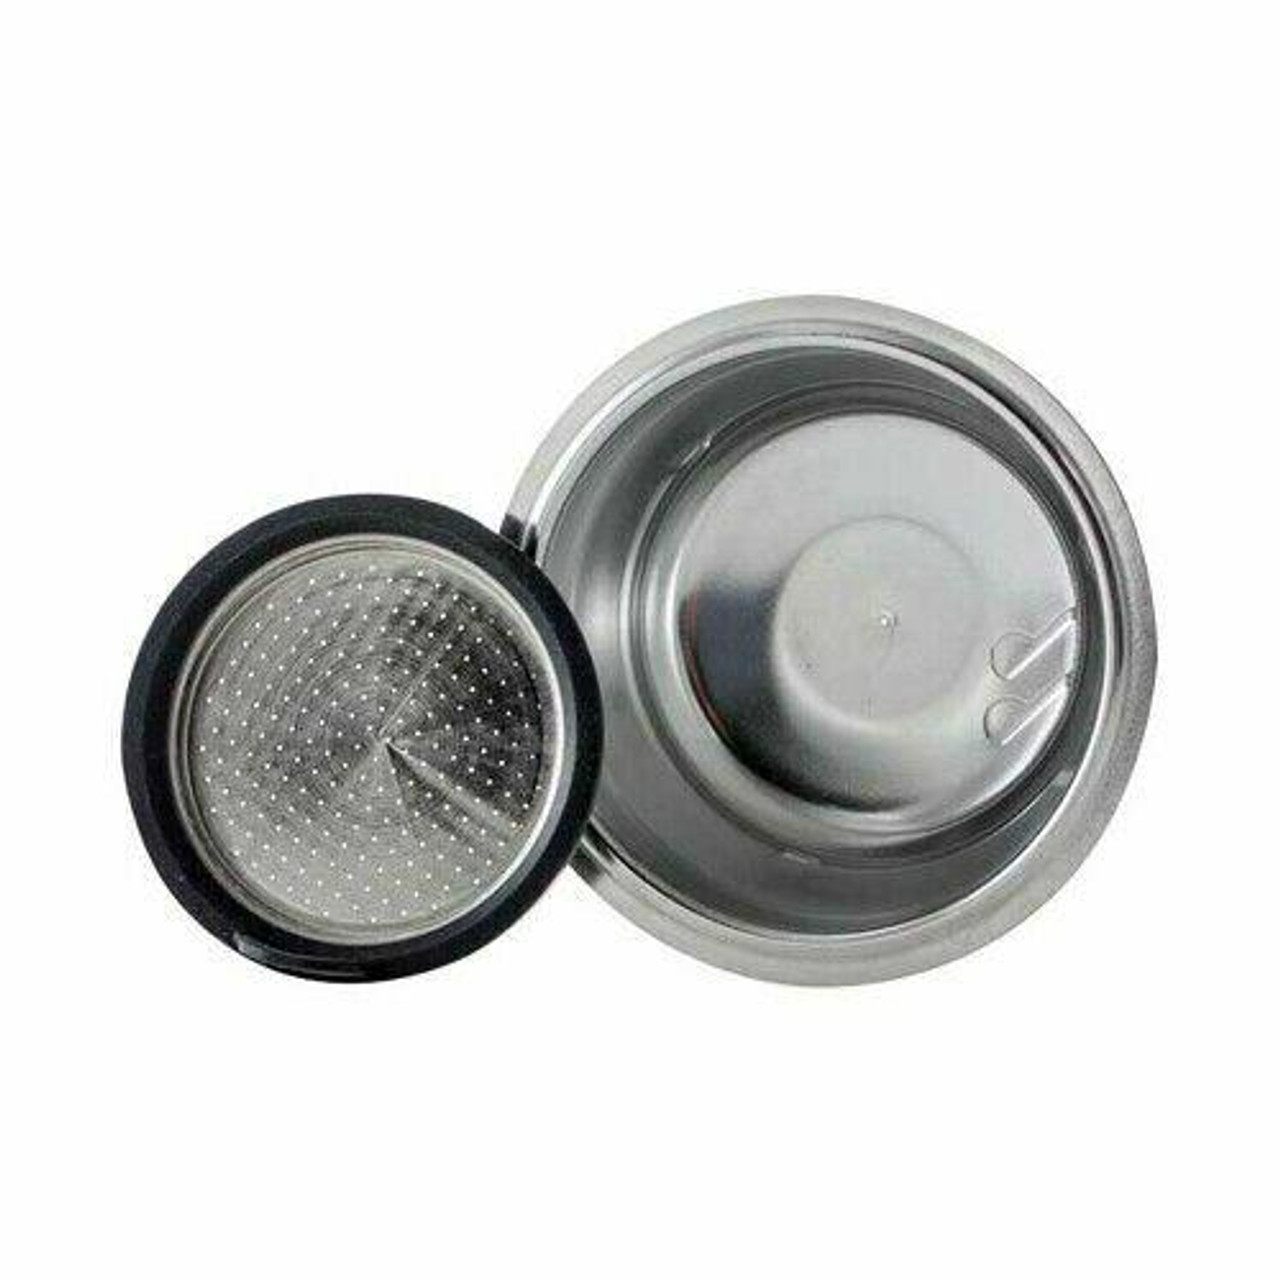 Water Filter for Espresso DELONGHI DLSC401 Coffee makers 2 portions.